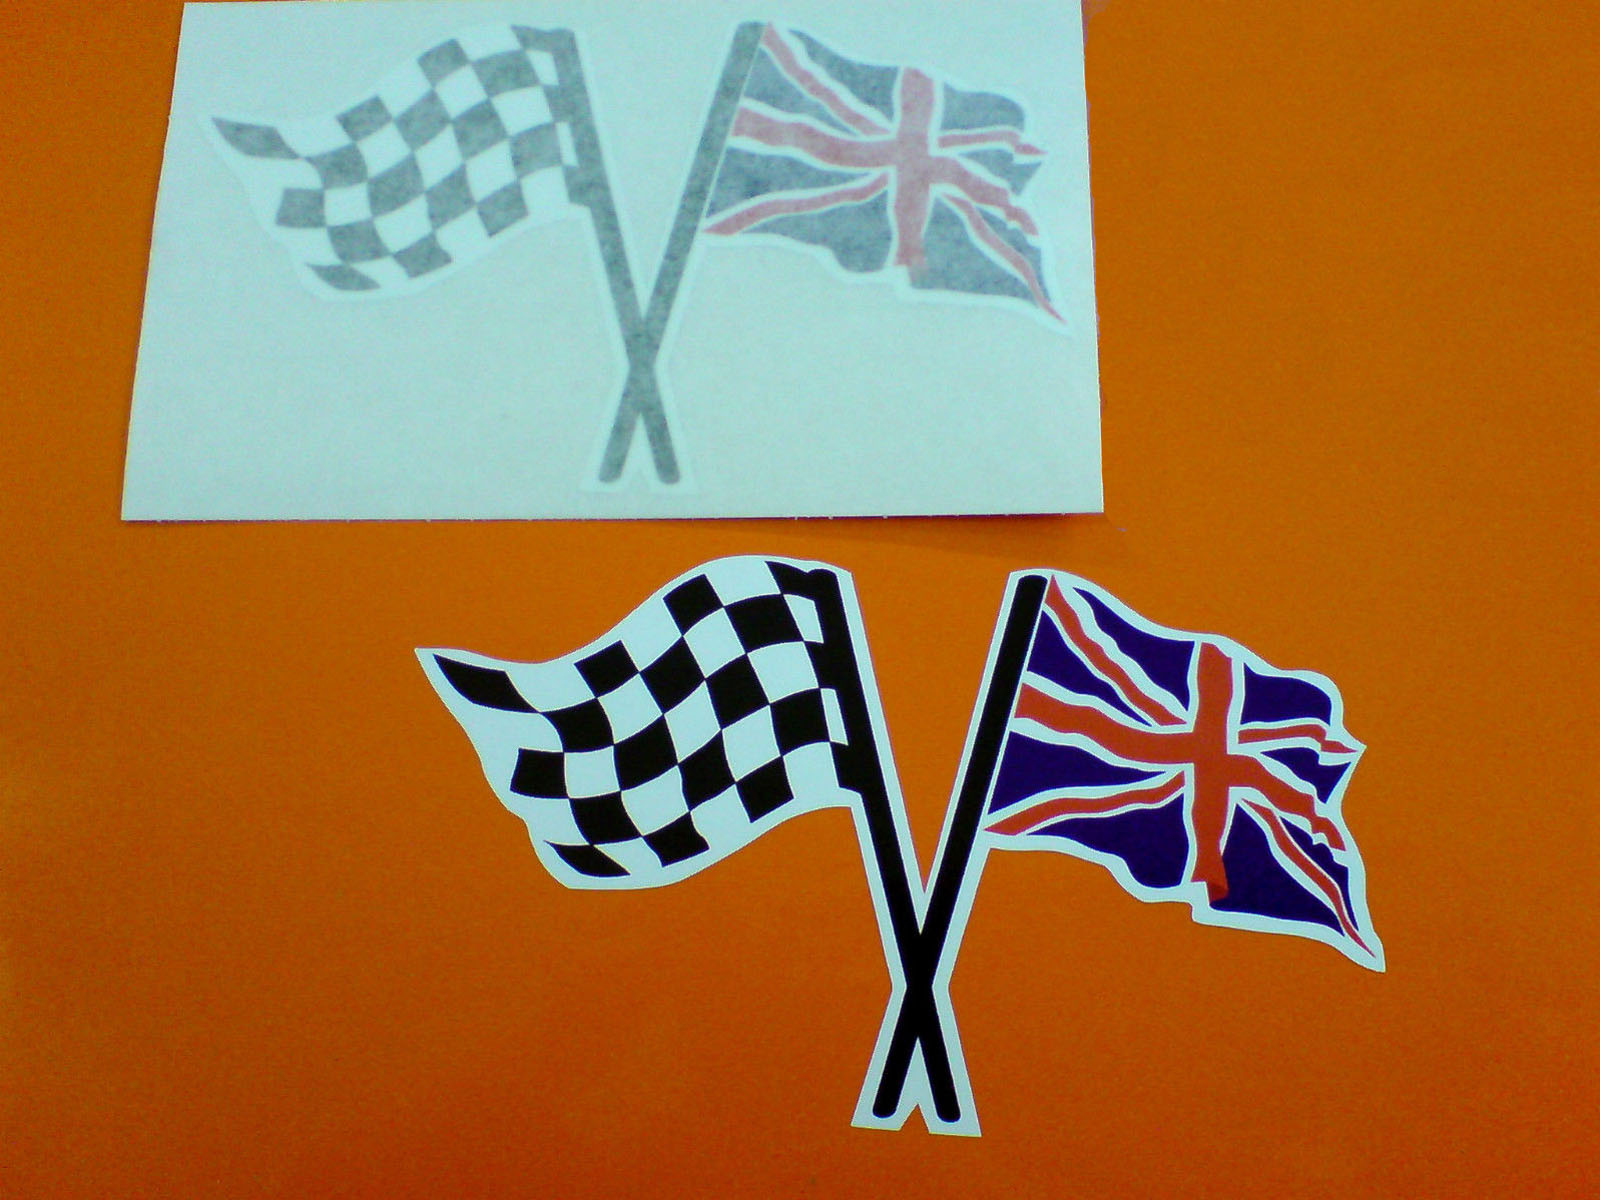 CHEQUERED AND UNION JACK FLAG STICKERS. Two crossed flags on poles. A black and white chequered and a red, white and blue Union Jack.